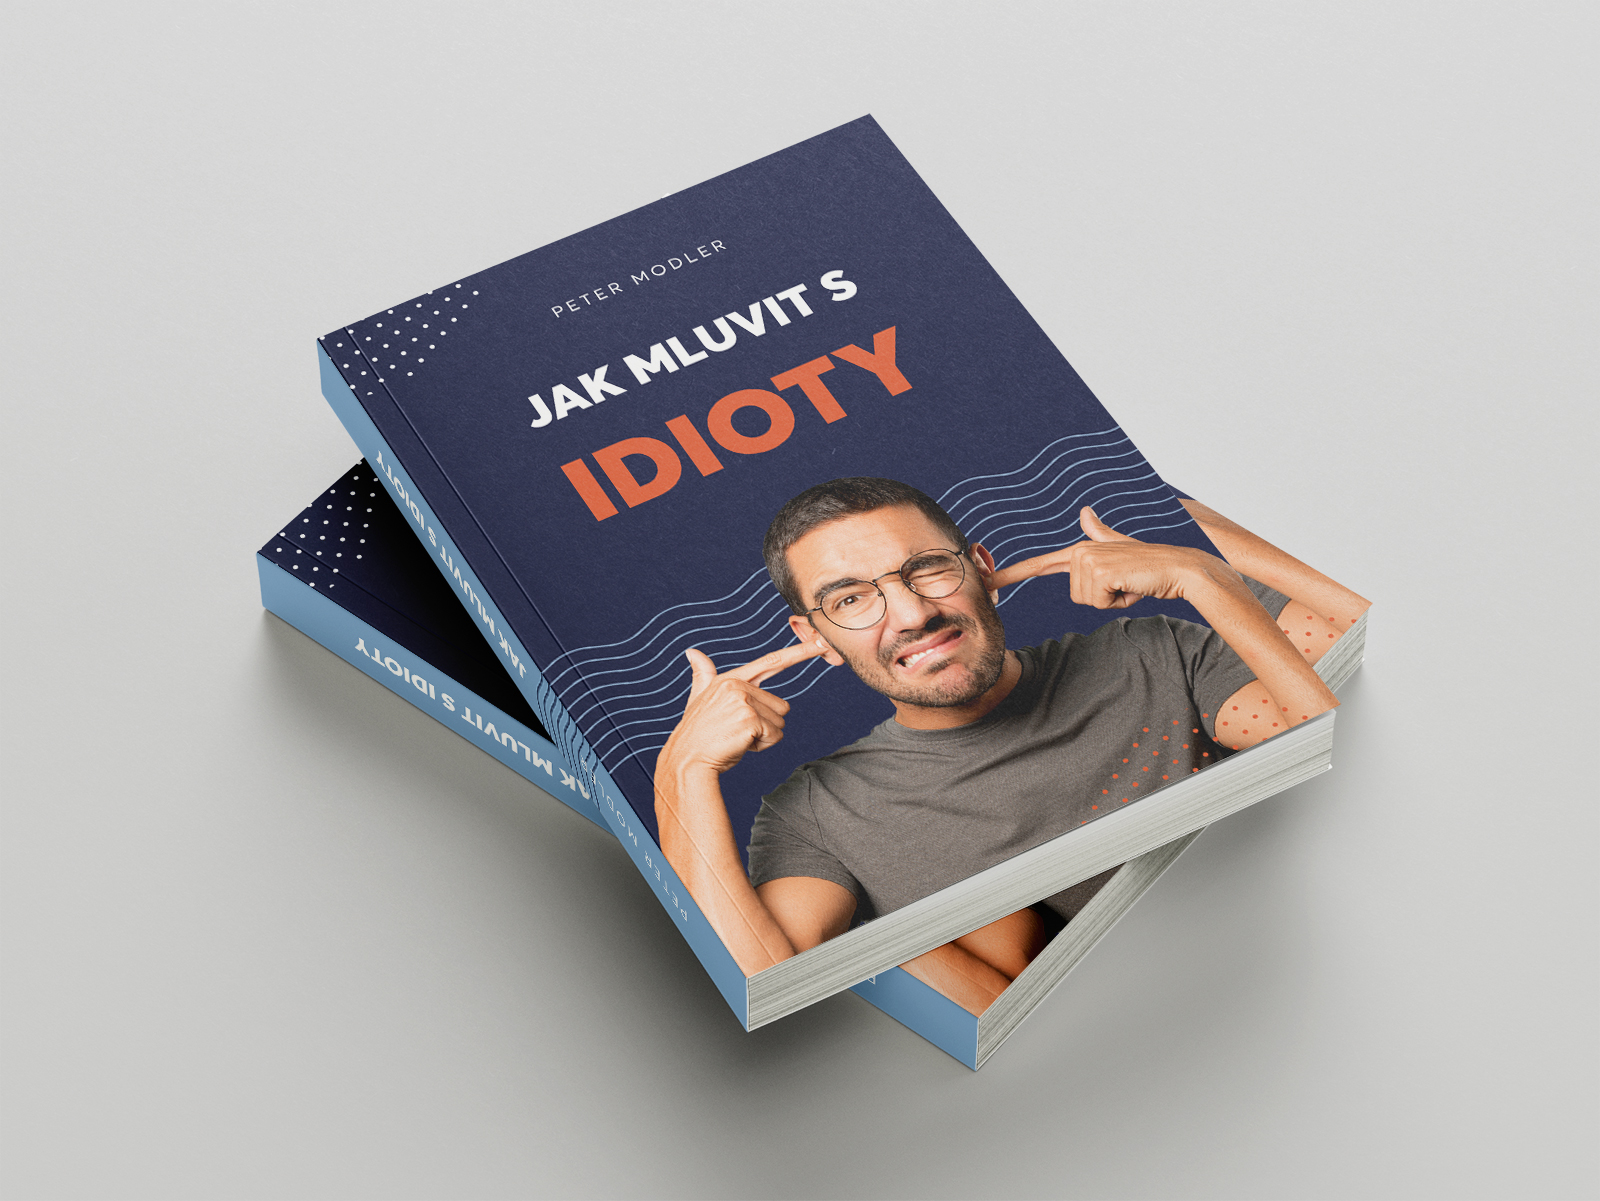 Book Jak mluvit s idioty, Peter Modler